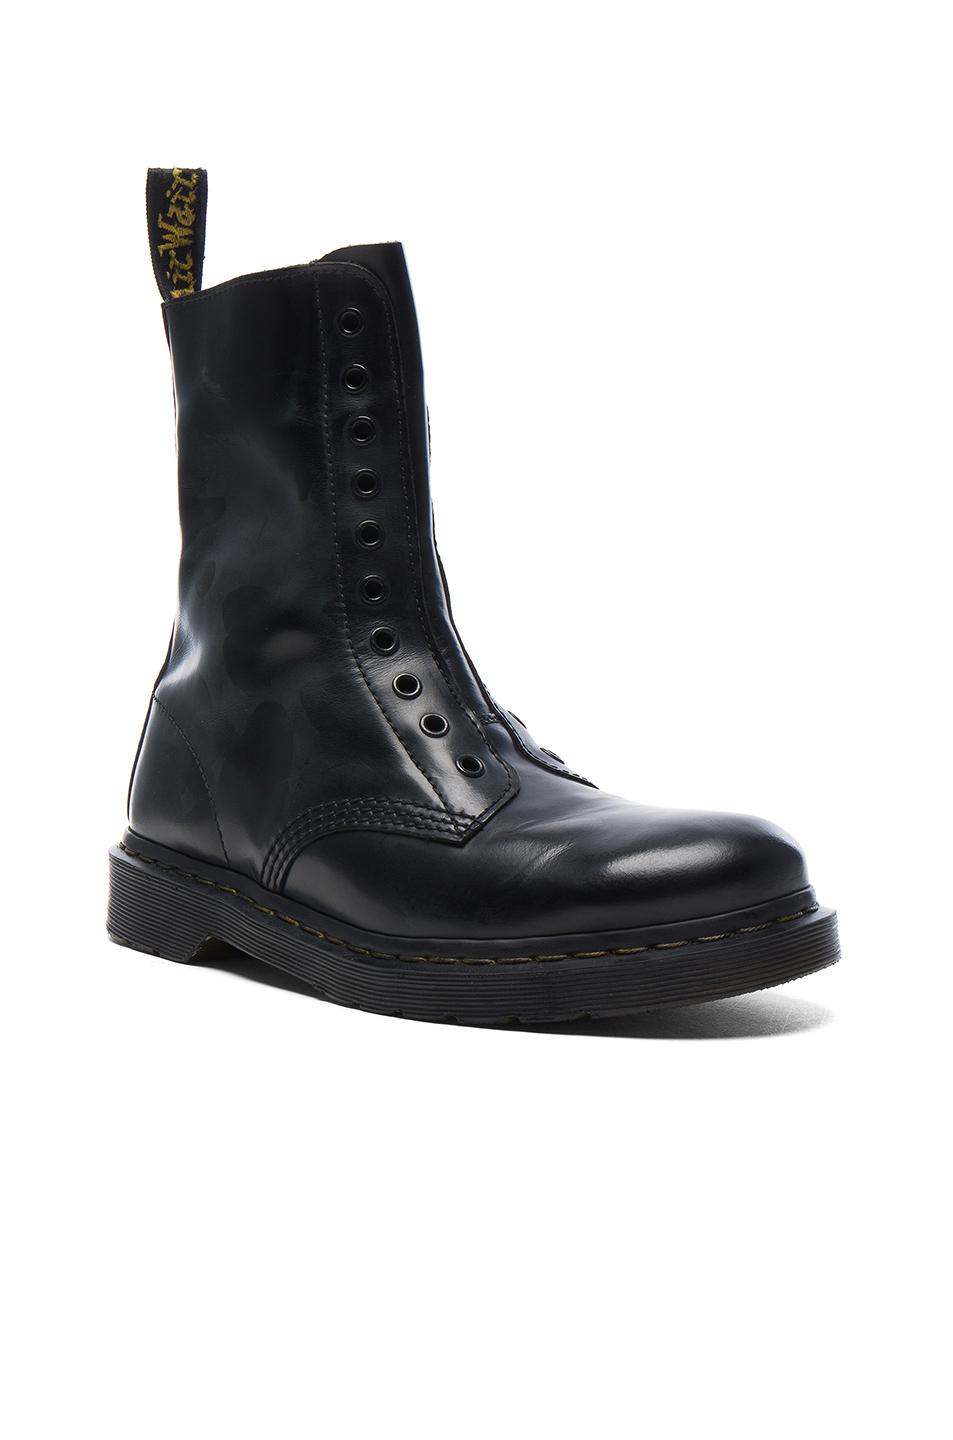 Vetements X Dr. Martens Leather Borderline Boots in Black | Lyst